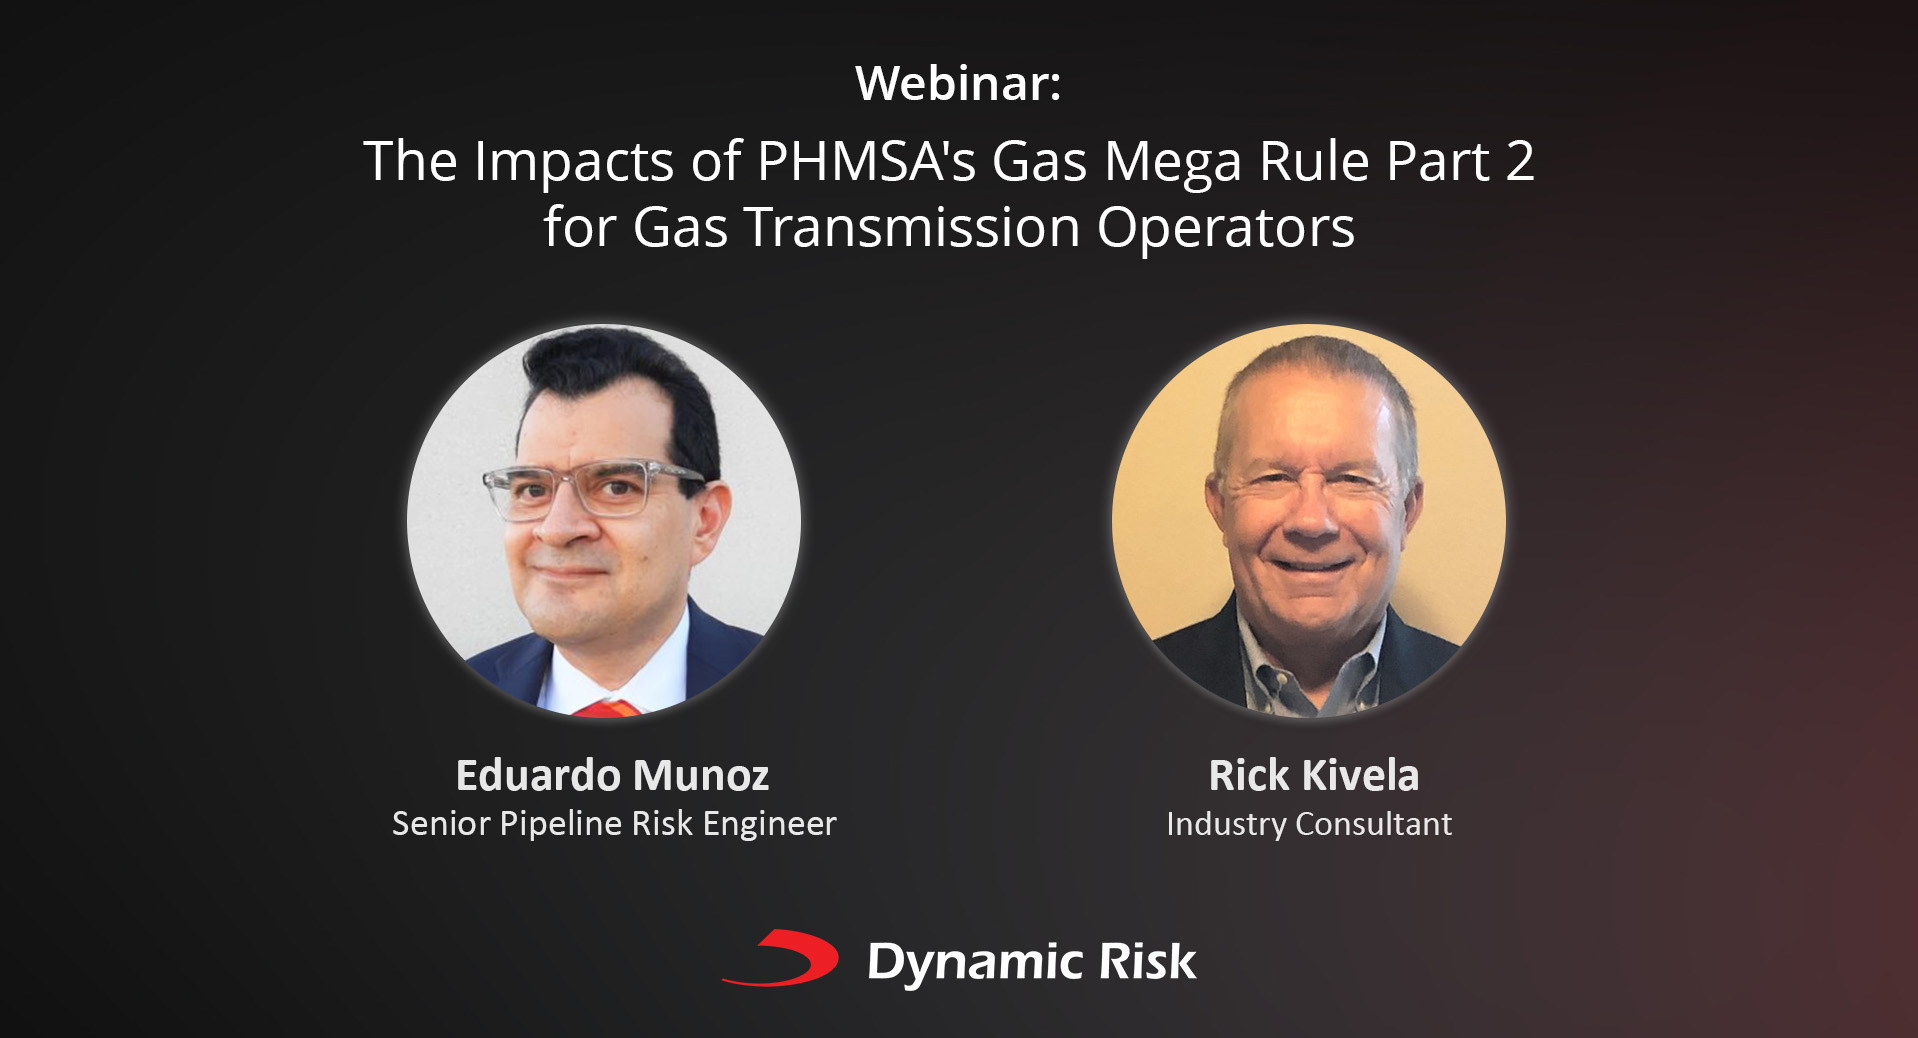 Webinar: The Impacts of PHMSA's Gas Mega Rule Part 2 for Gas Transmission Operators